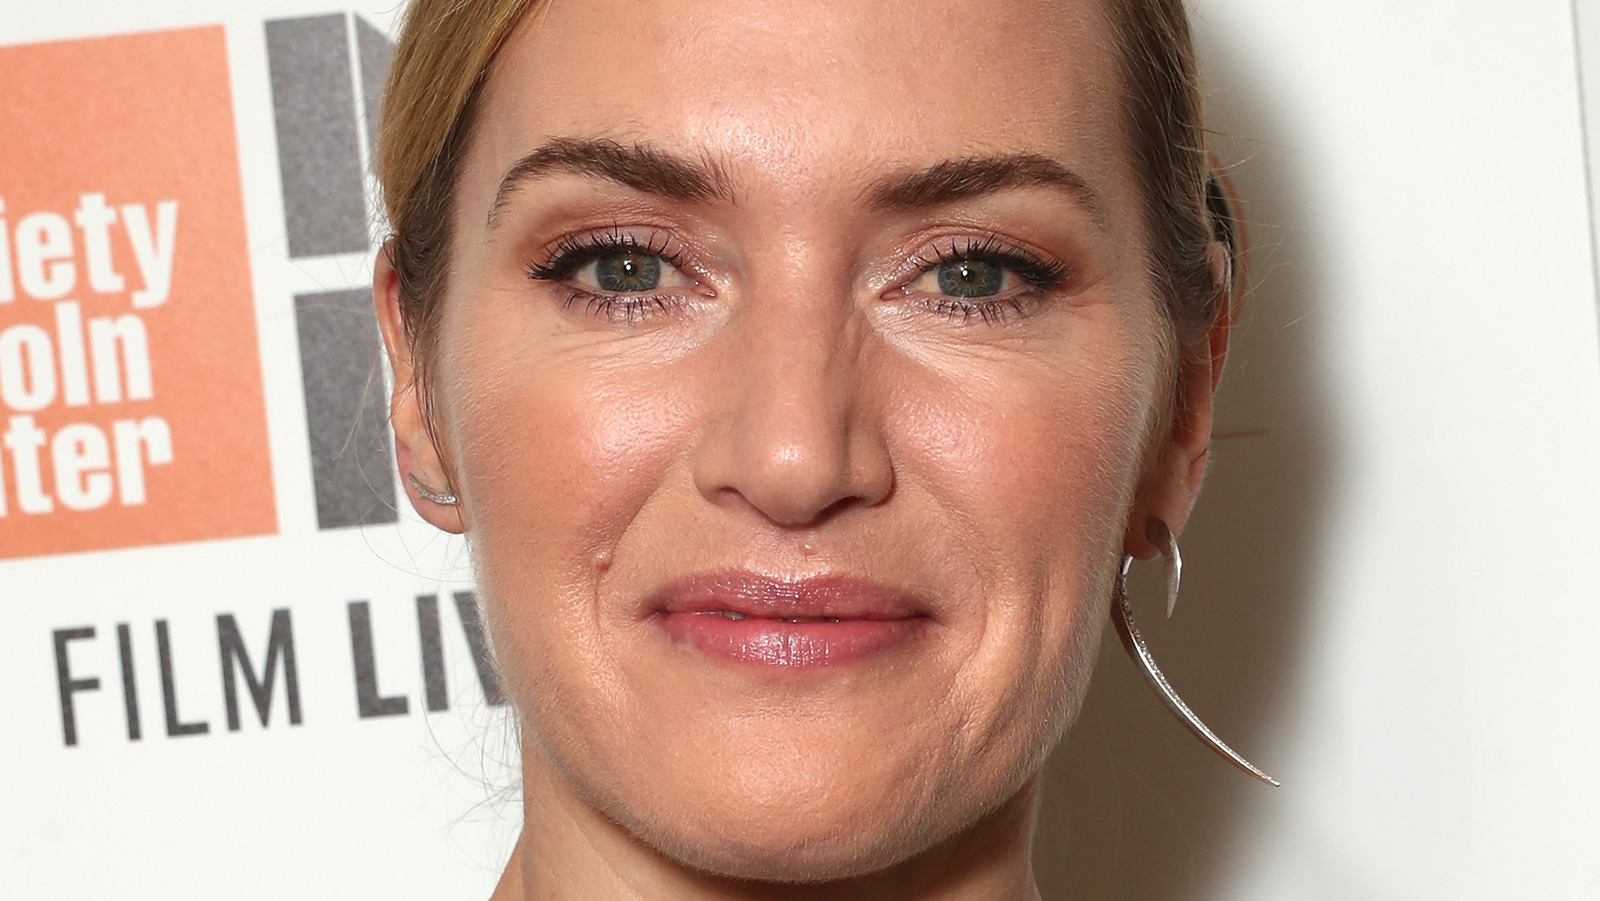 Kate Winslet Reveals How The Media's Cruelty Impacted Her Body Image -...